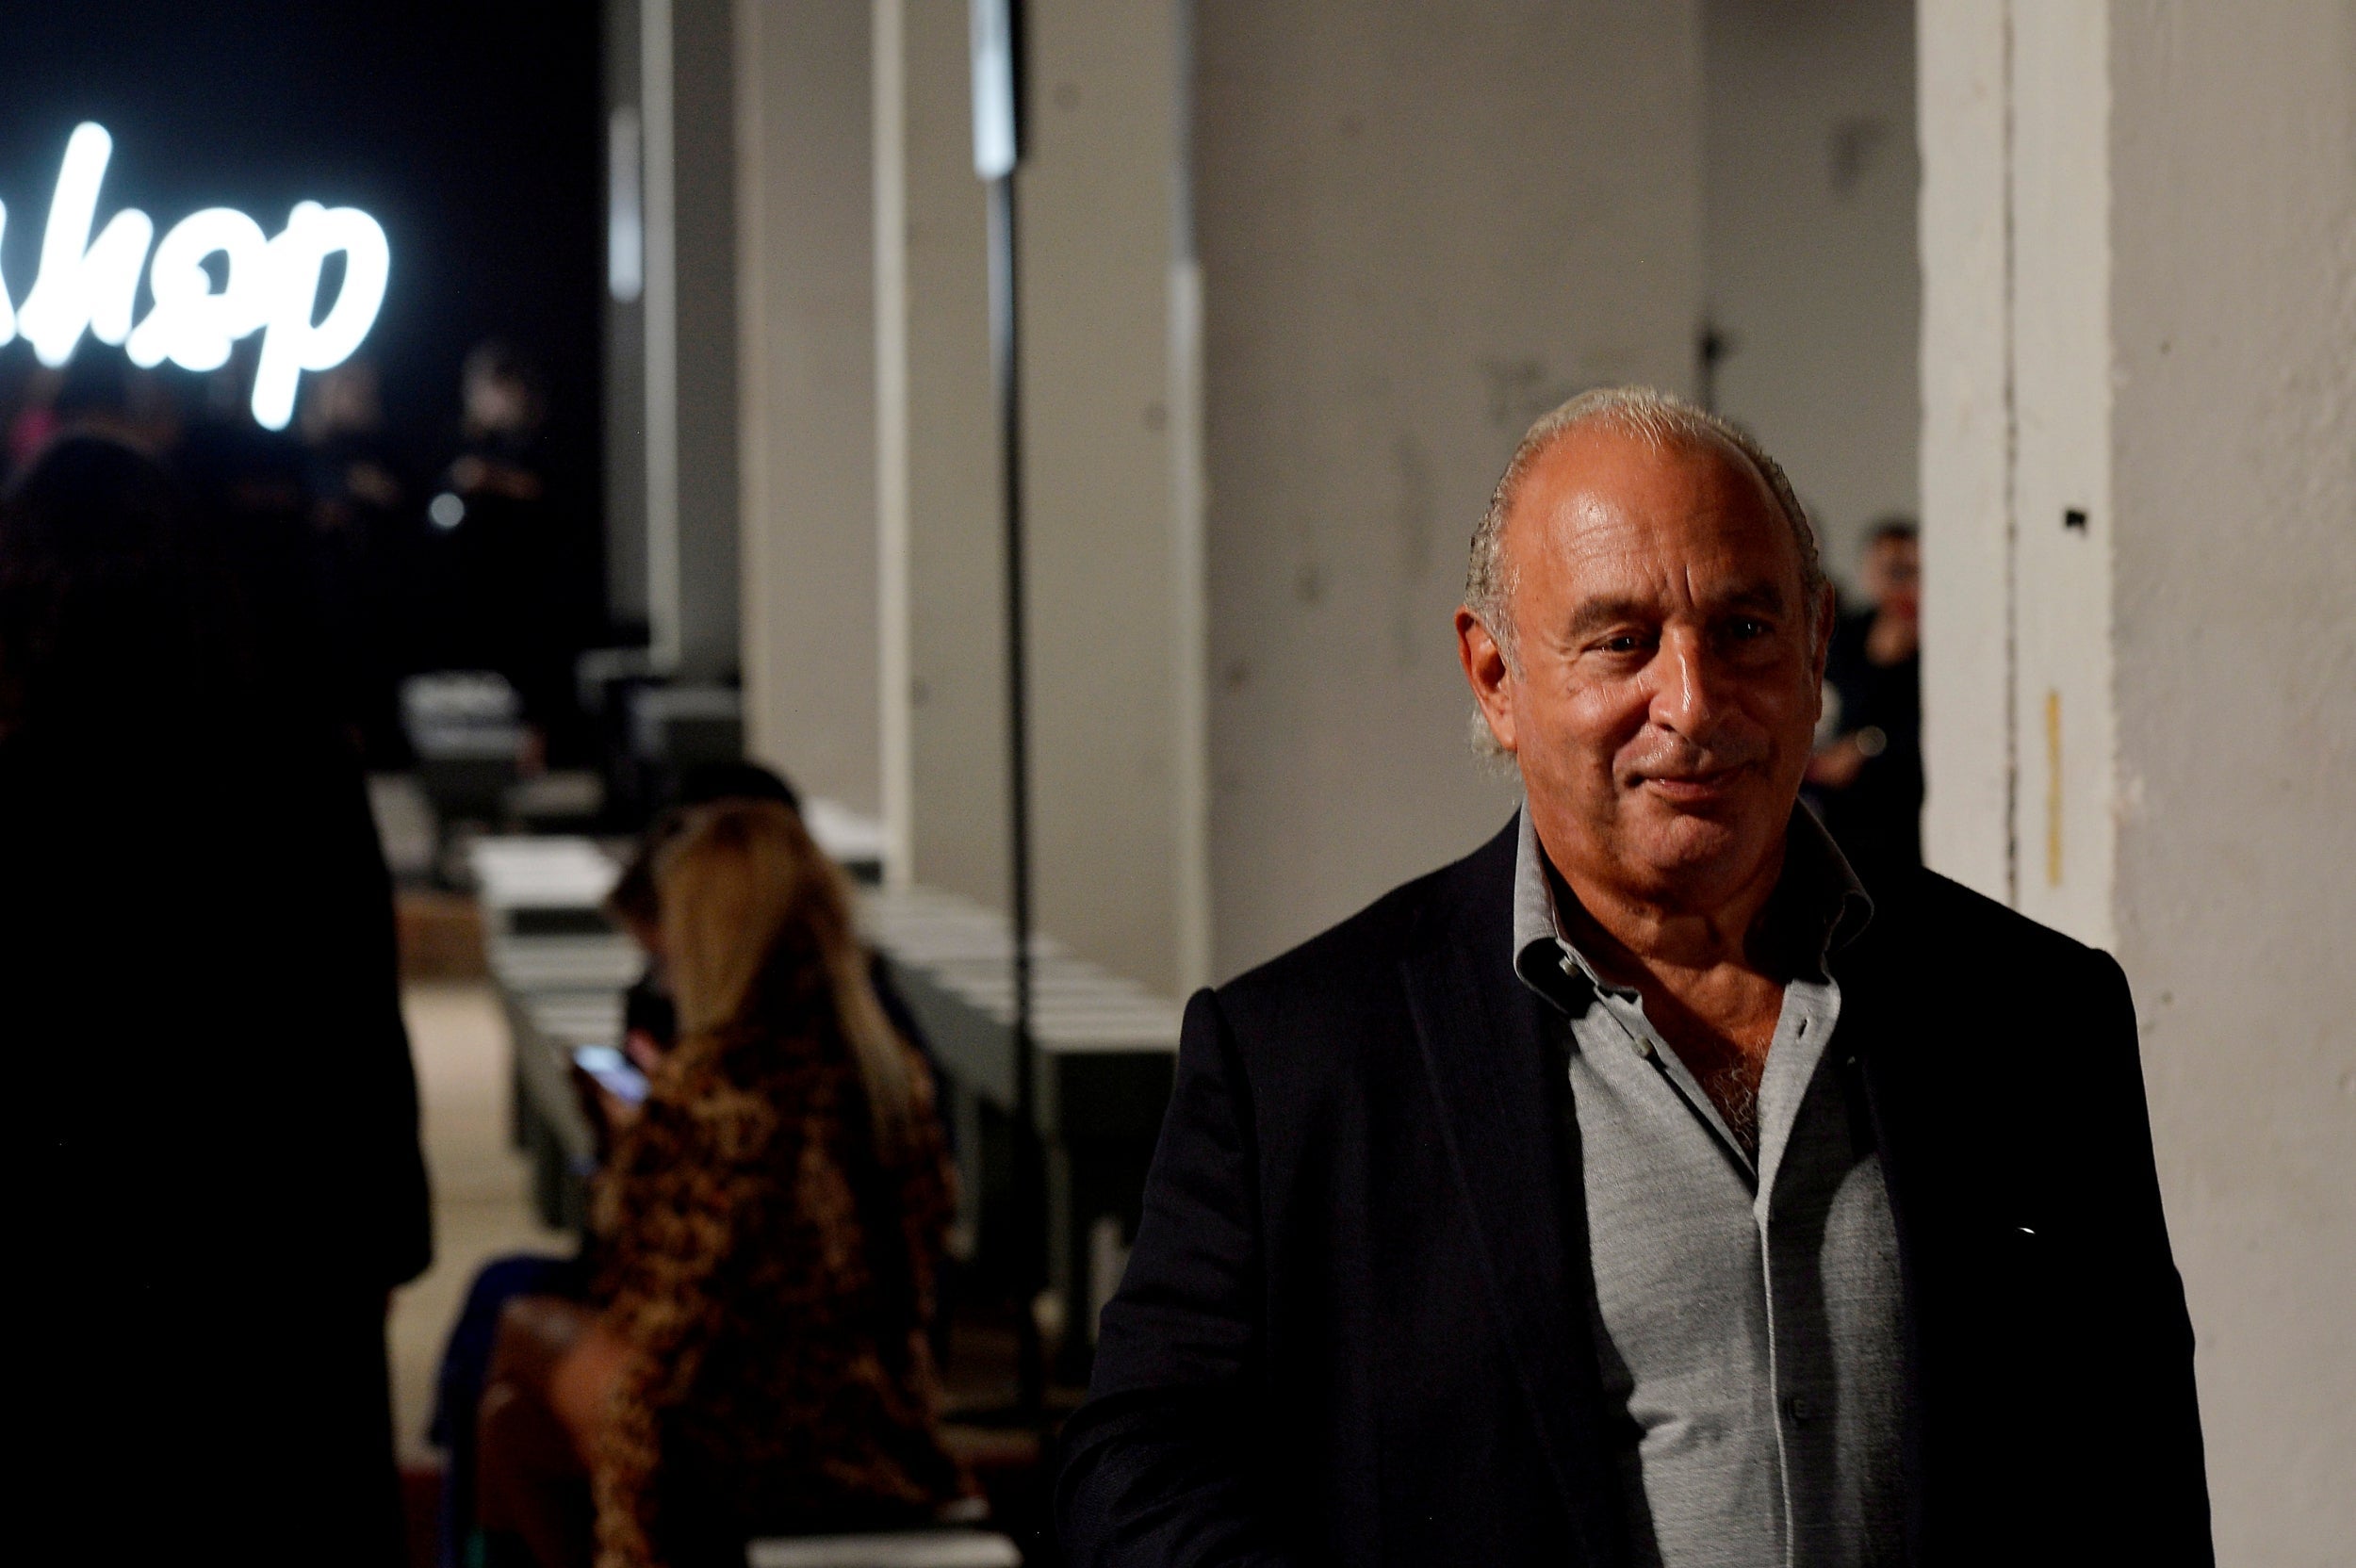 Sir Philip Green plans to continue with efforts to restructure his Arcadia Group over the coming days